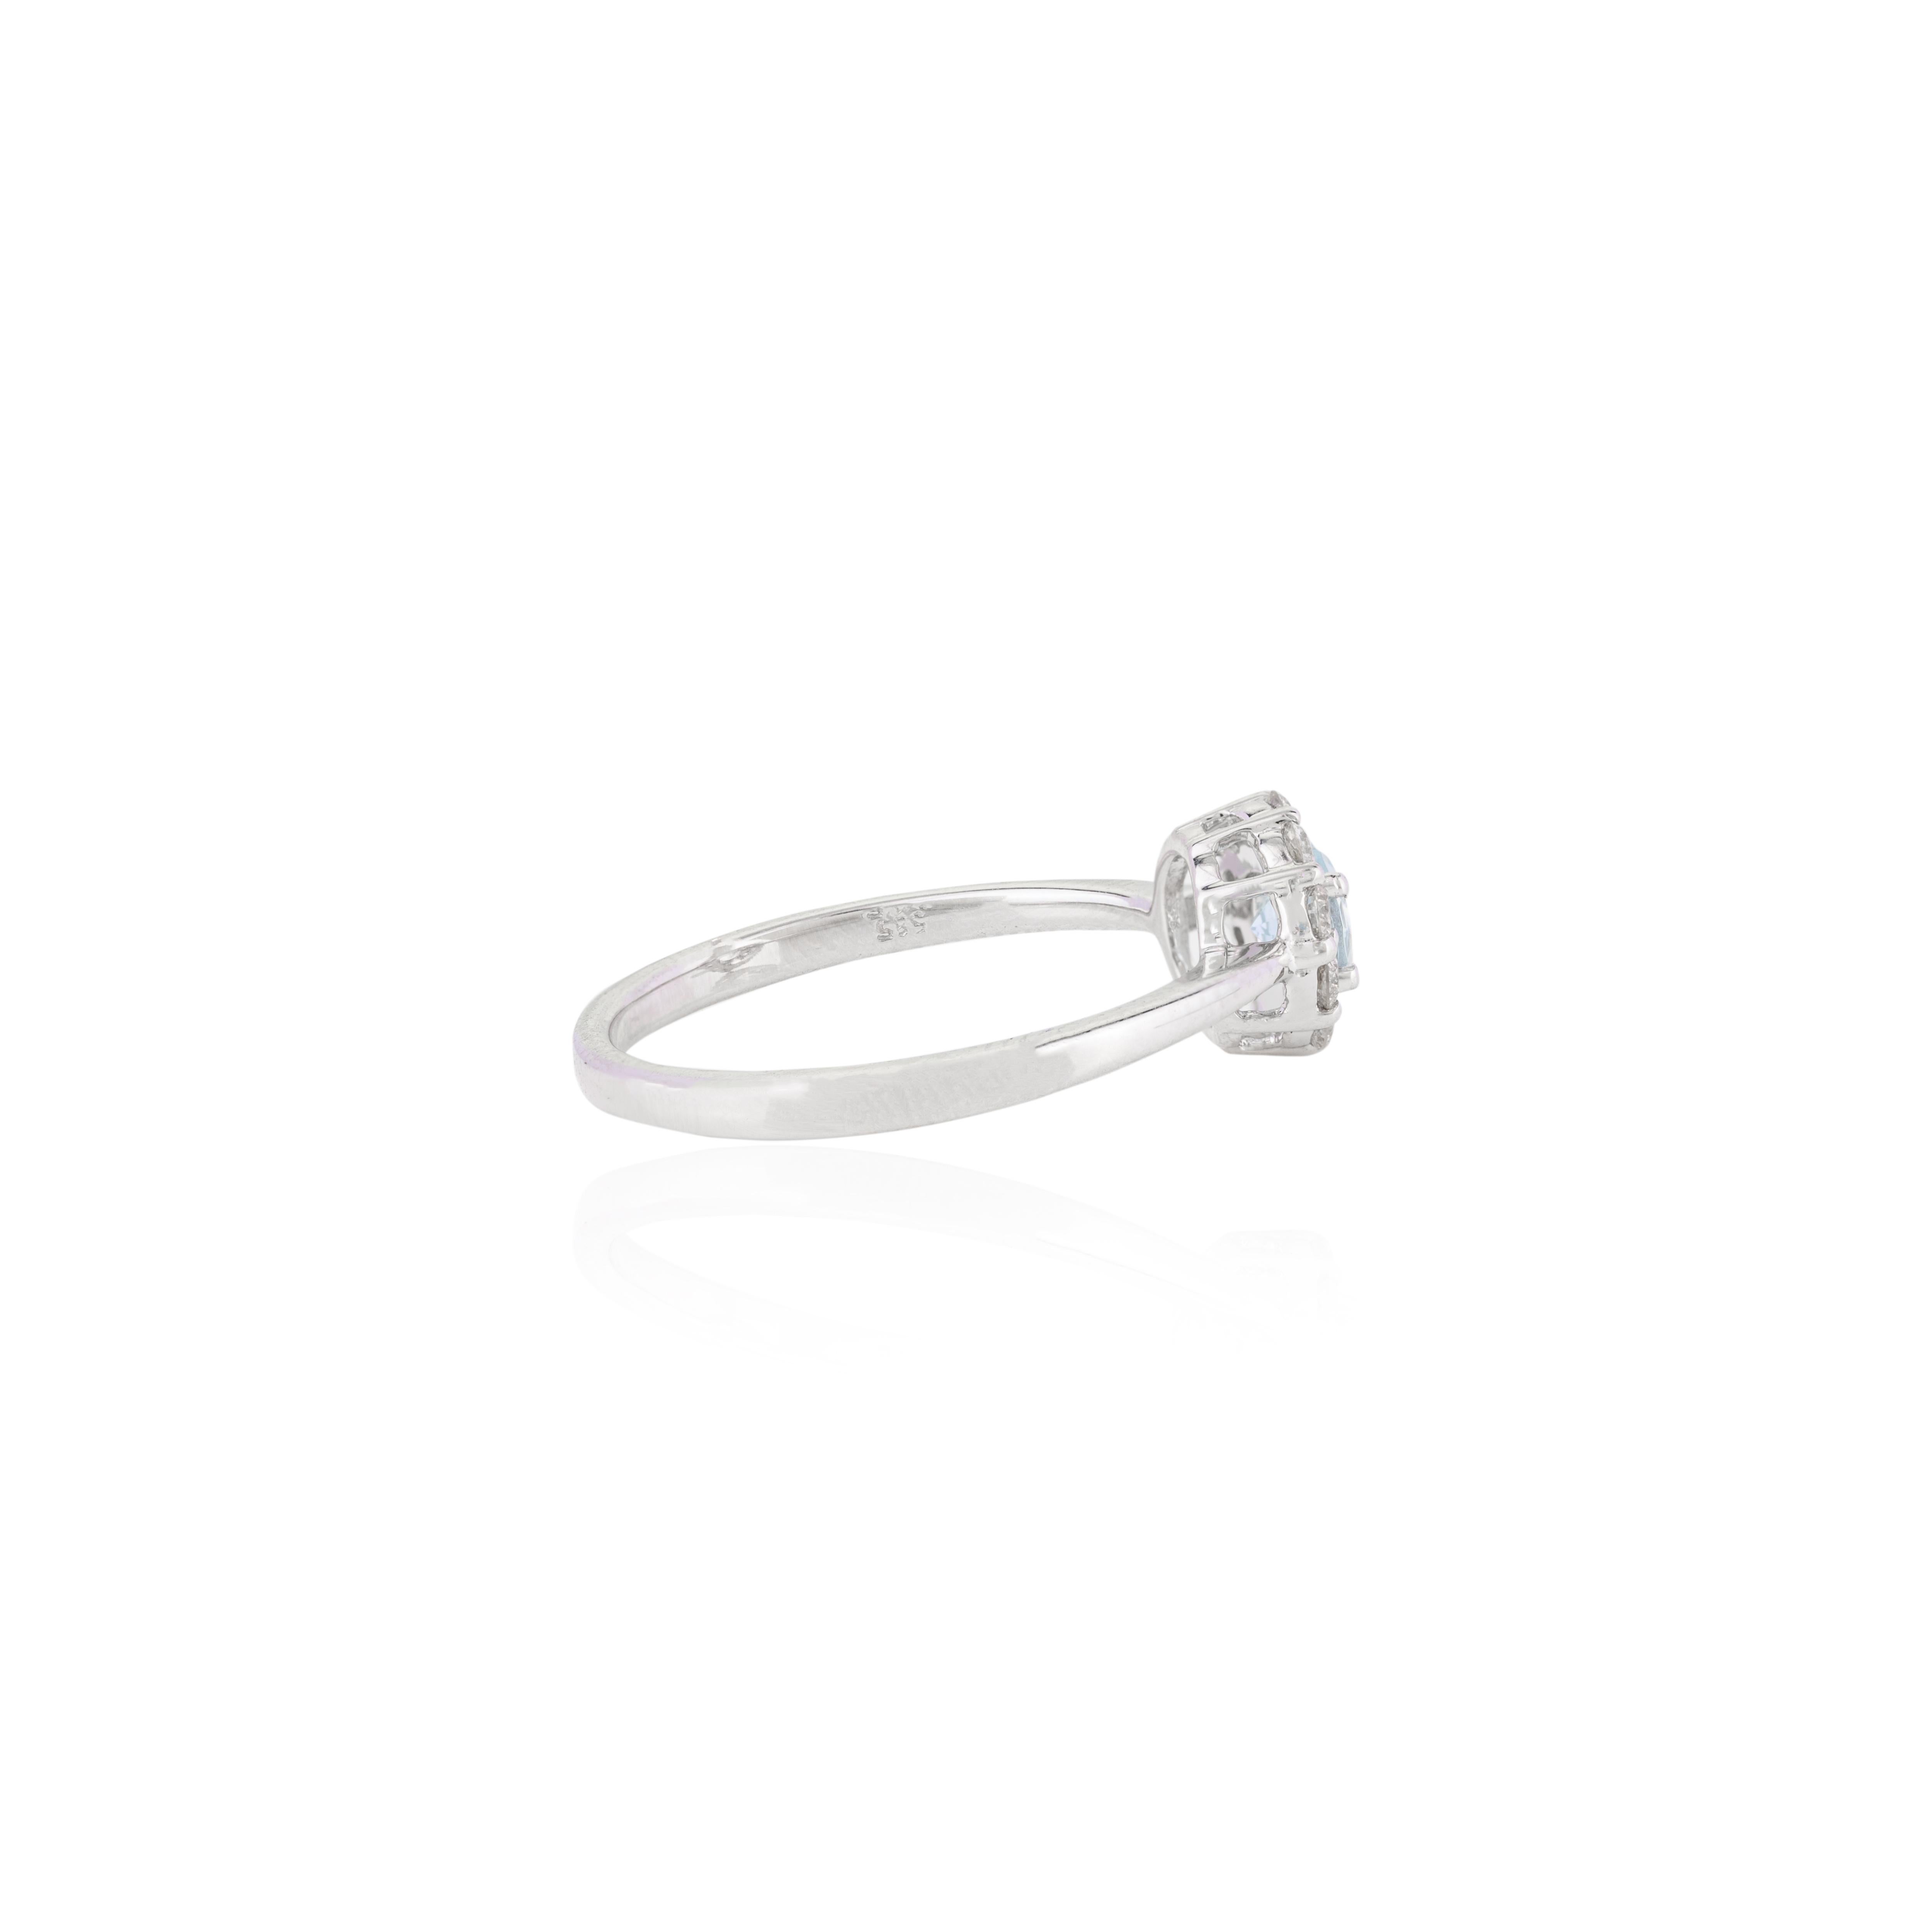 For Sale:  Dainty Aquamarine Halo Diamond Ring Gift for Girlfriend in 14k White Gold 7